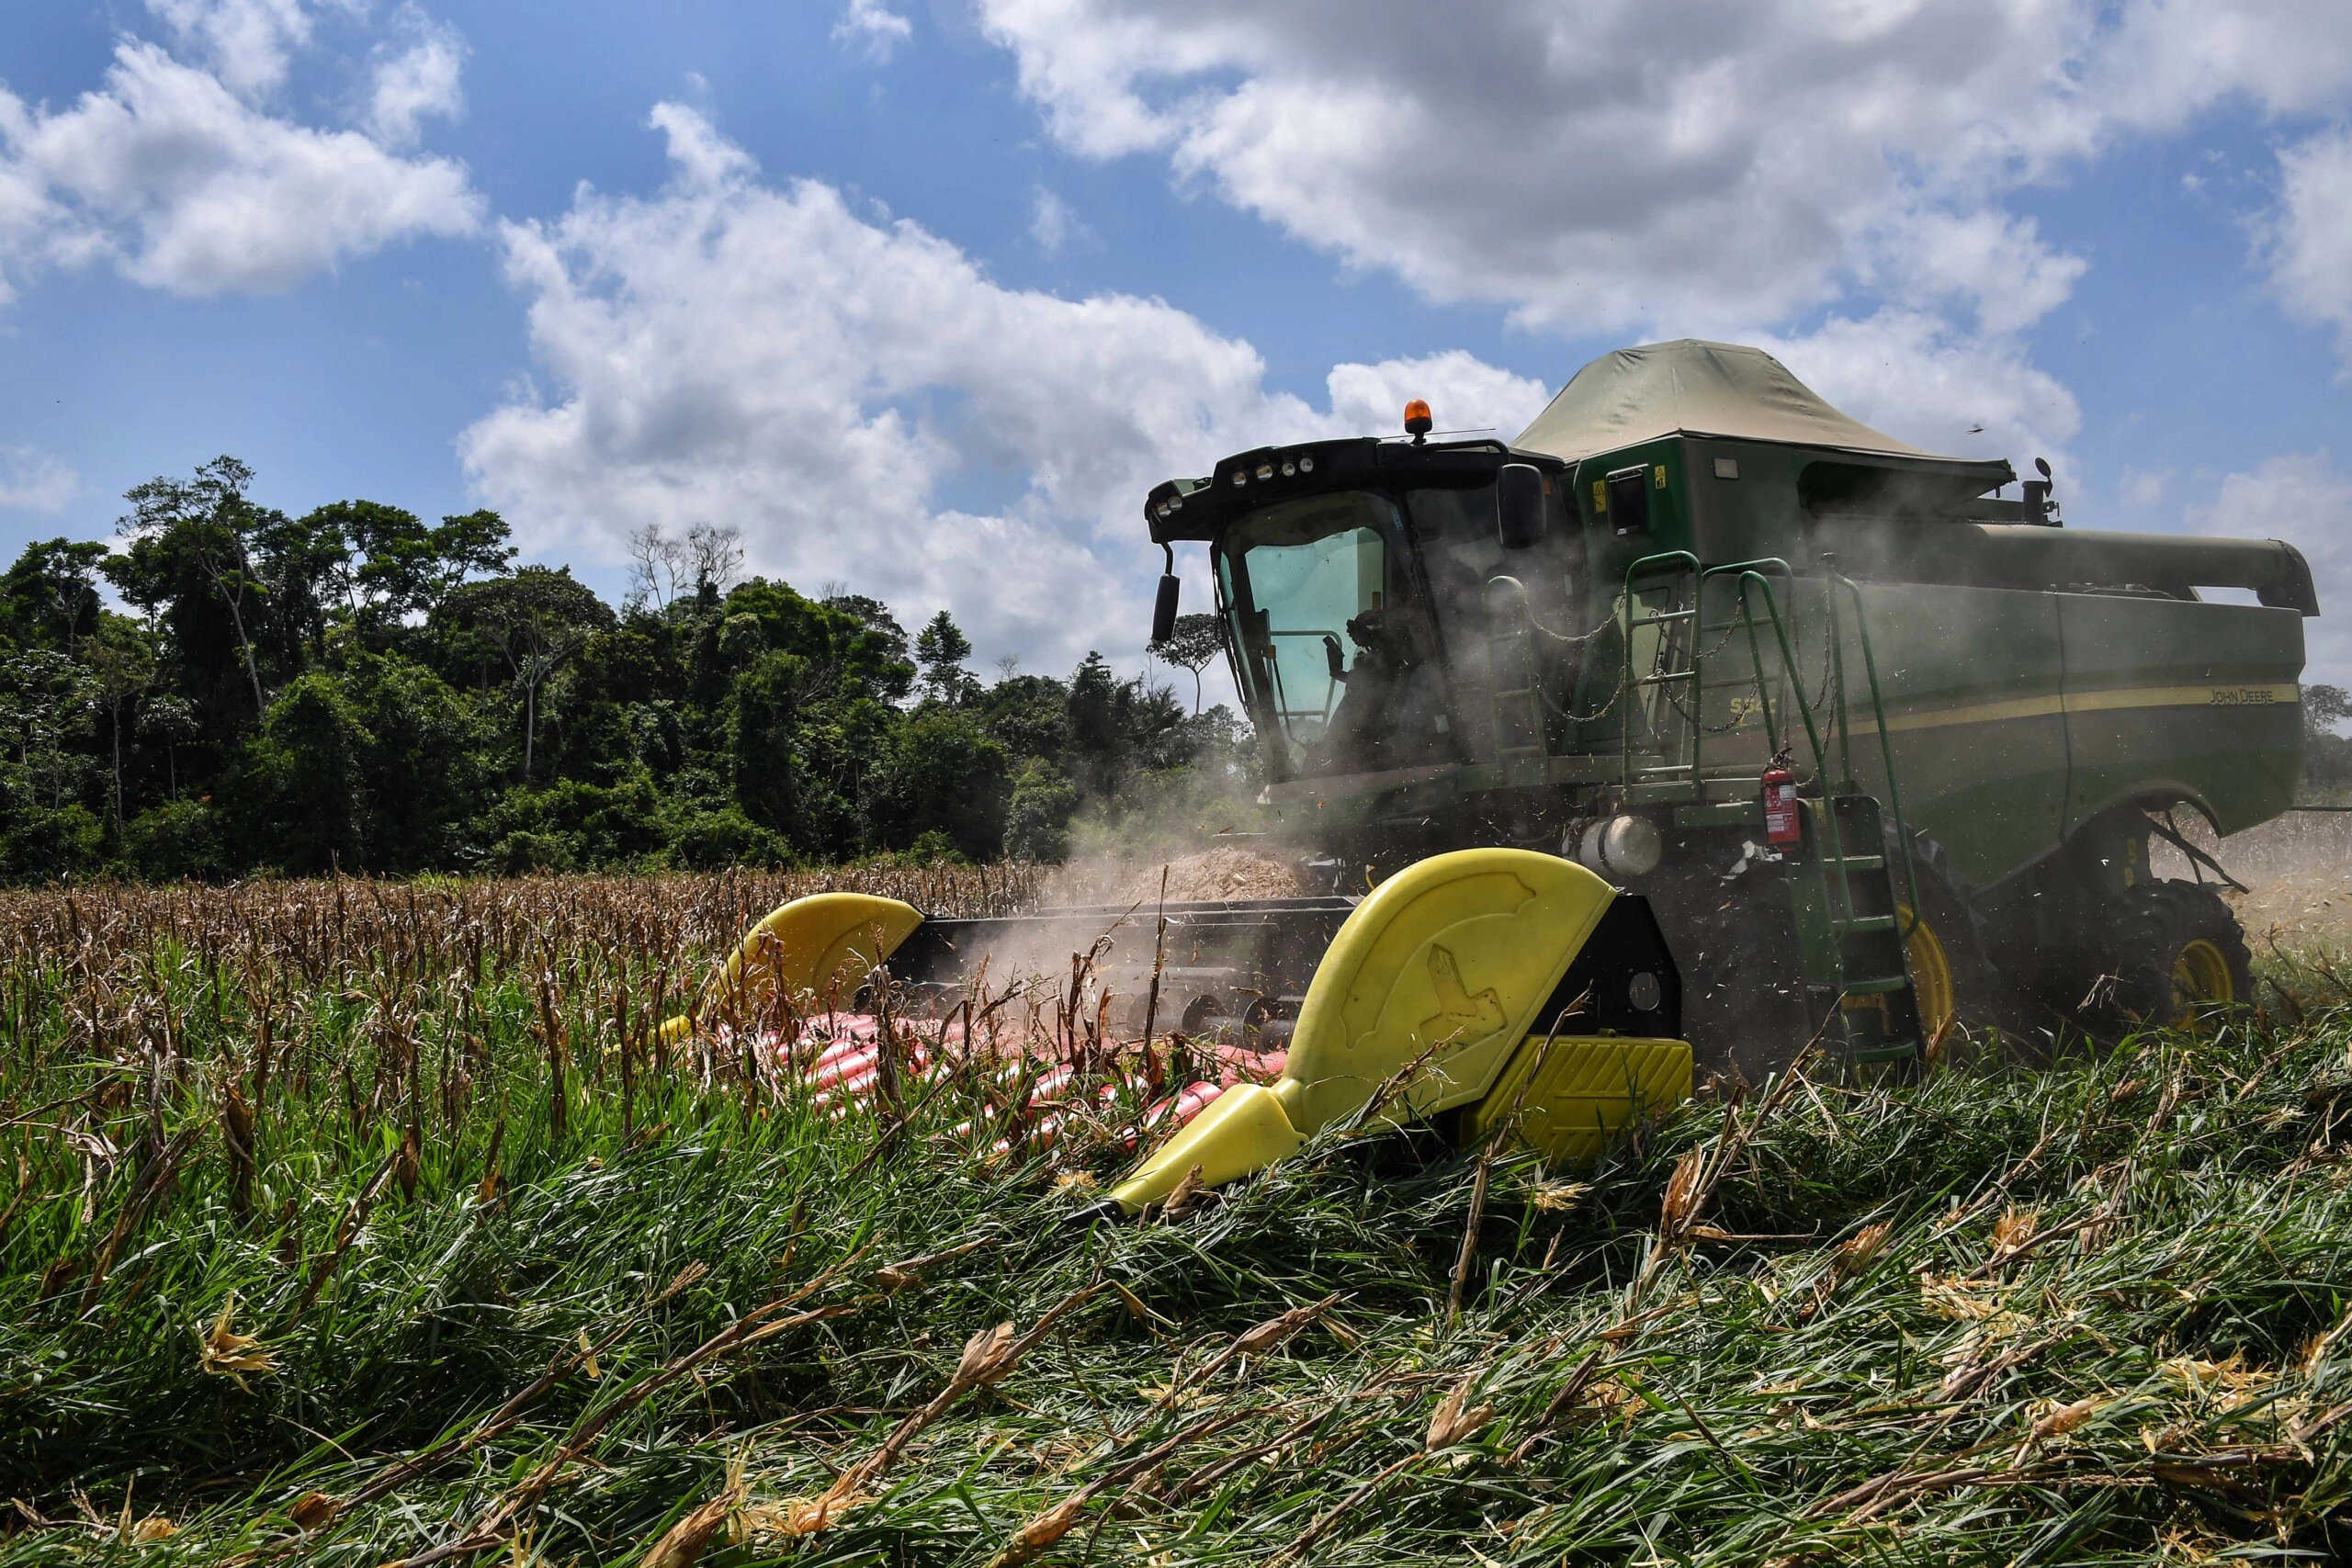 A harvester works on a corn field at Brazilian cattlebreeder Luiz Medeiros dos Santos' farm in Ruropolis, Para state, Brazil, in the Amazon rainforest, on September 5, 2019. - Cattle breeders, indigenous teachers and loggers are among more than 20 million people living in the Amazon in northern Brazil, carving out a living from the world's largest rainforest (Photo by NELSON ALMEIDA / AFP) (Photo by NELSON ALMEIDA/AFP via Getty Images)